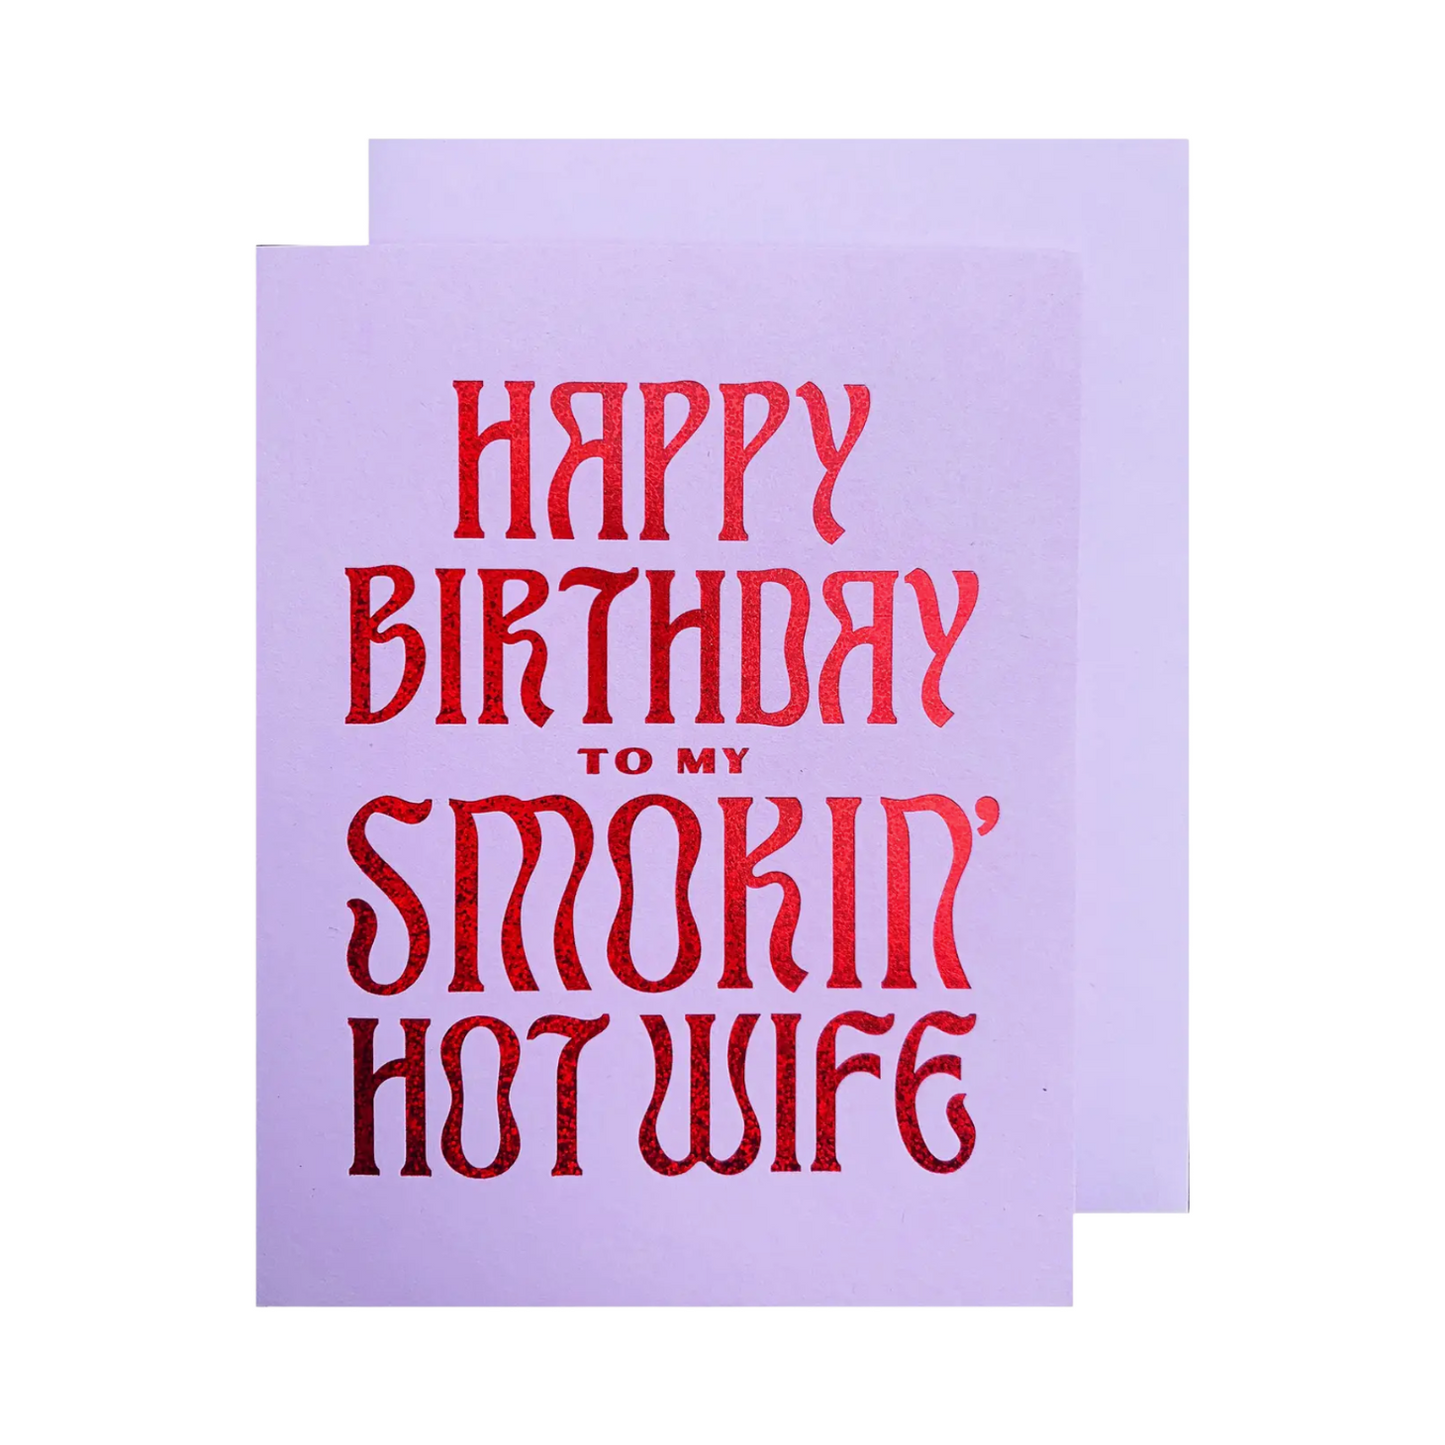 Hot Wife Birthday Card by The Social Type 